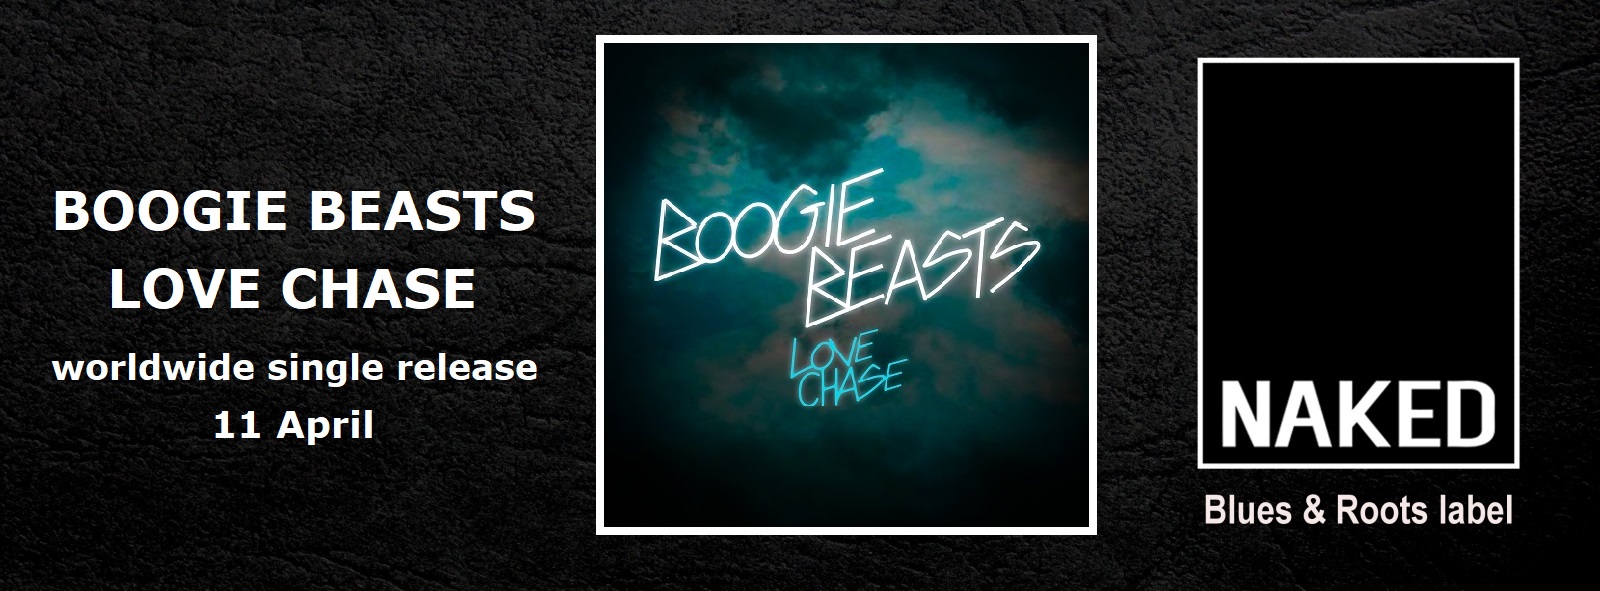 Boogie Beasts – Love Chase